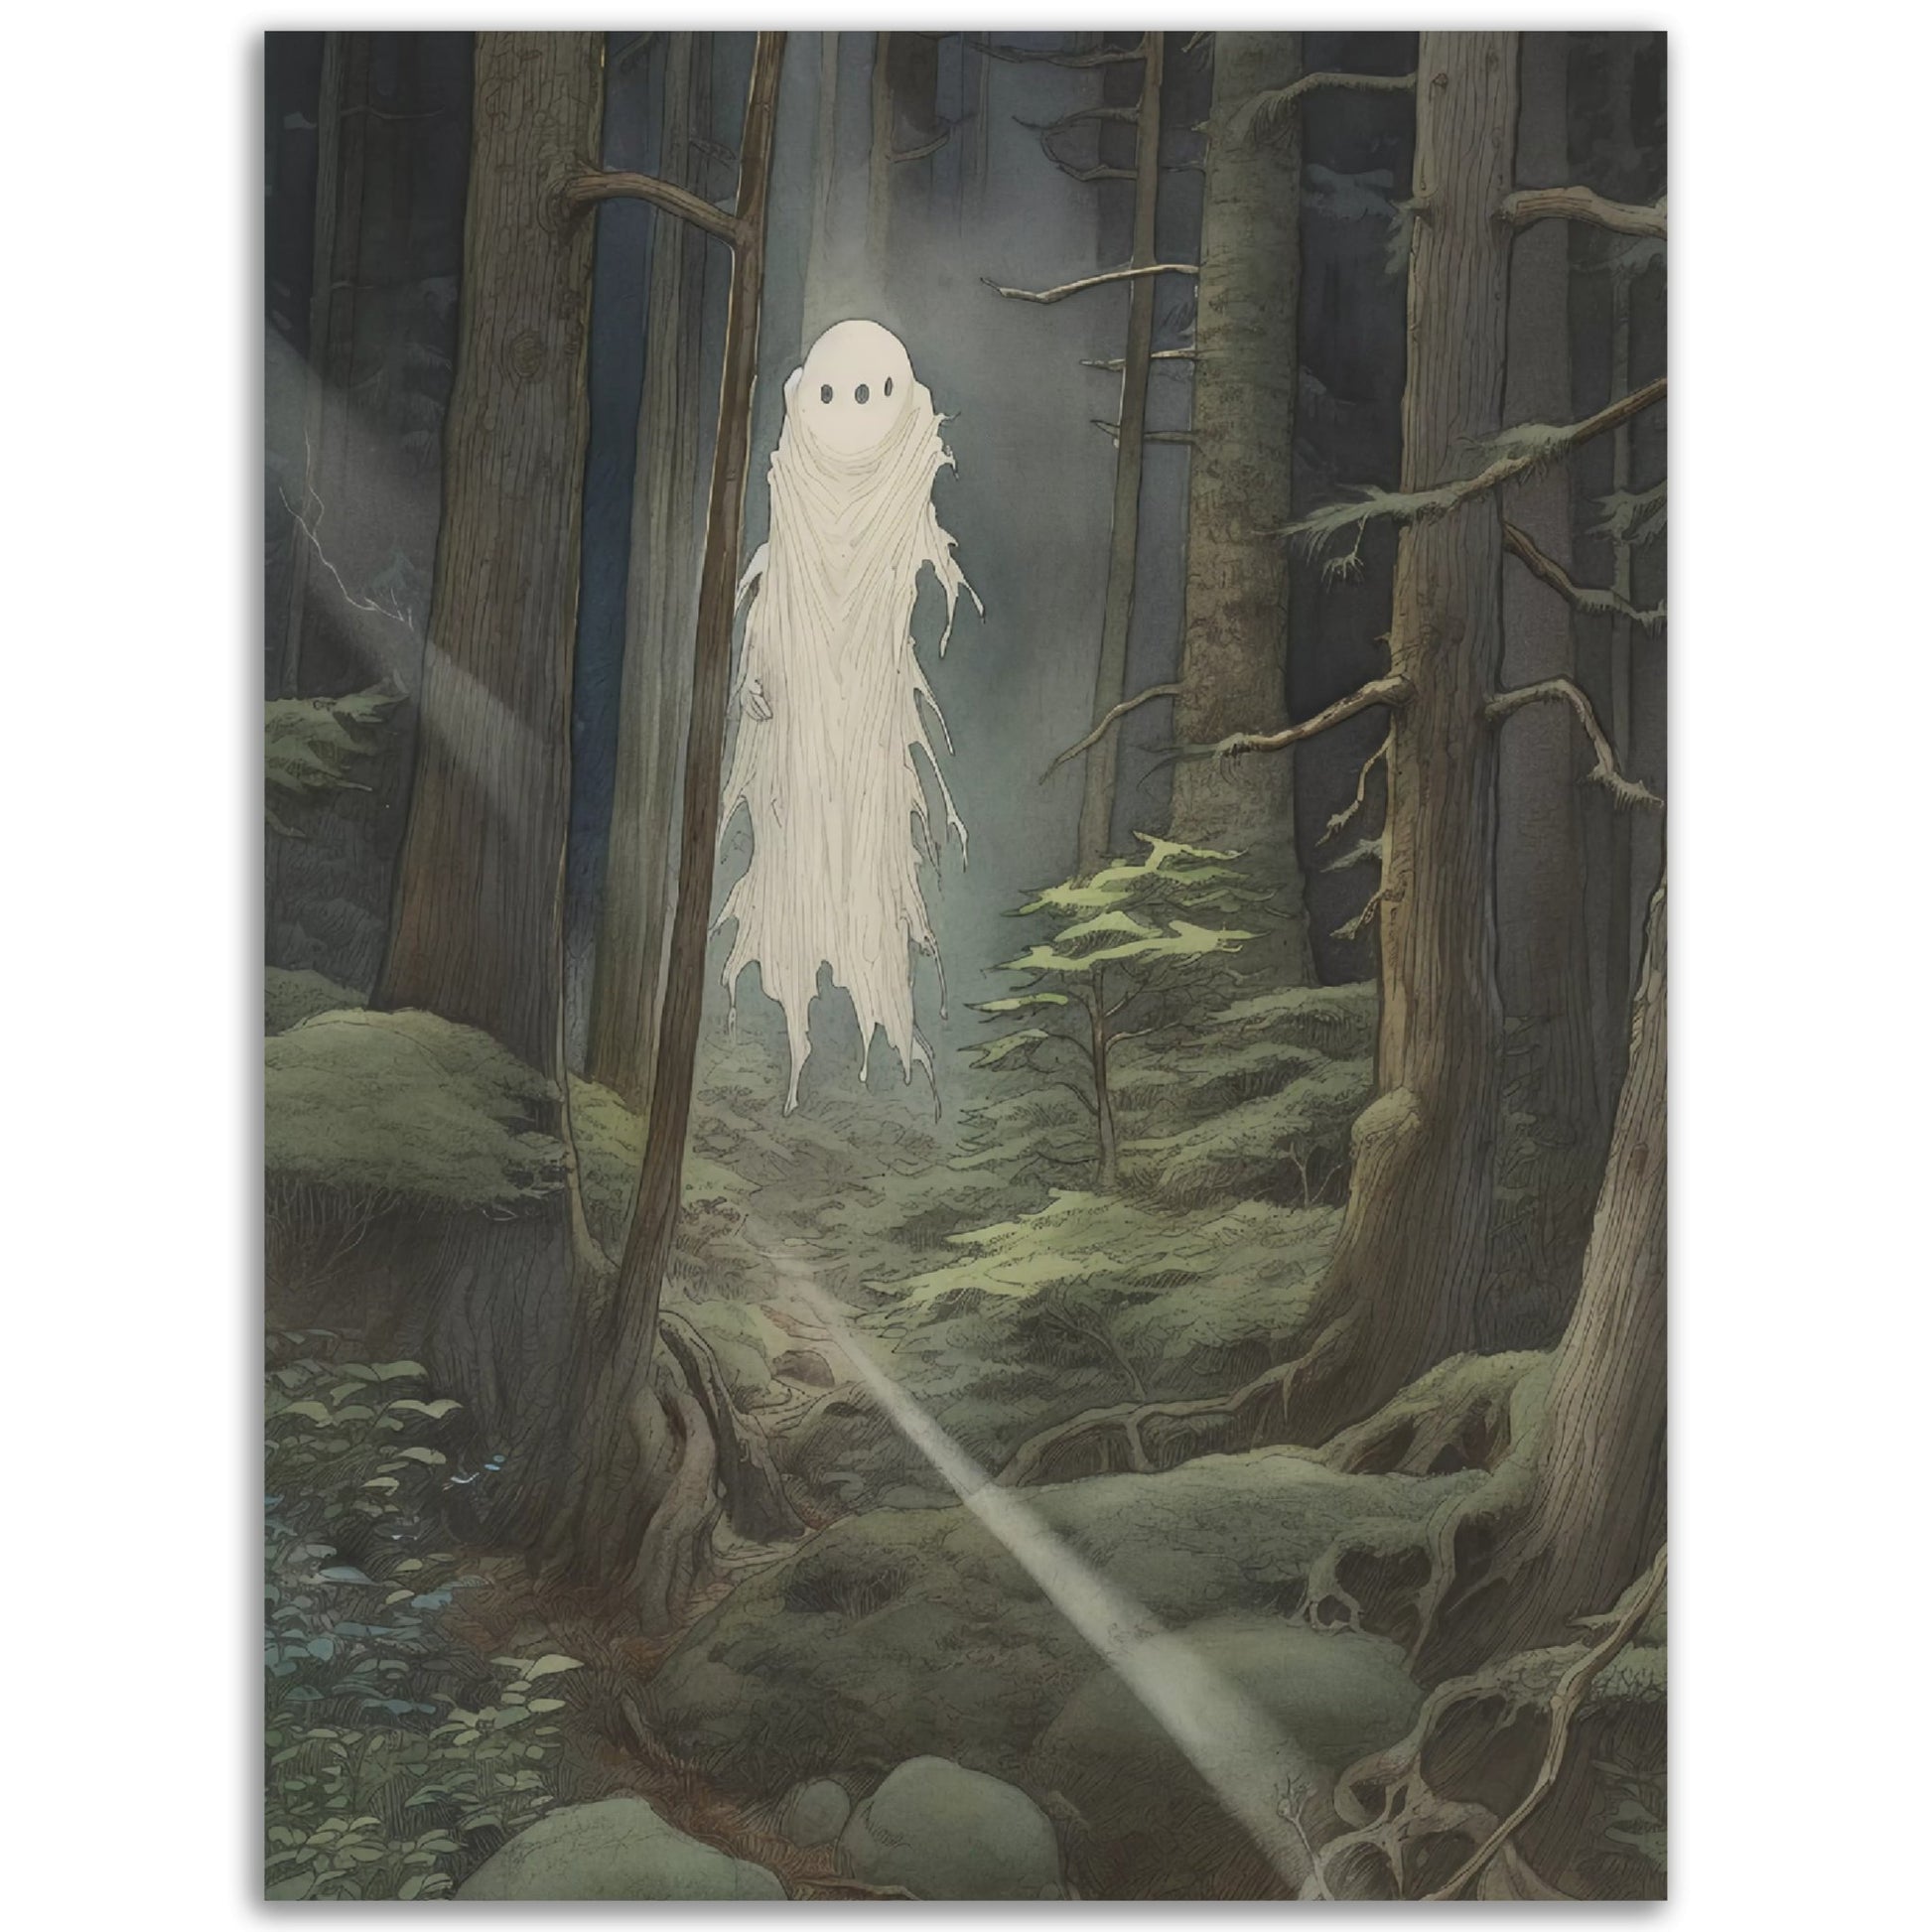 Description: A haunting poster of a Kodama Forest Spirit 4 gracefully lurking amidst a wooded landscape. Perfect for adding a touch of whimsical mystique to any room decor or poster wall art collection.